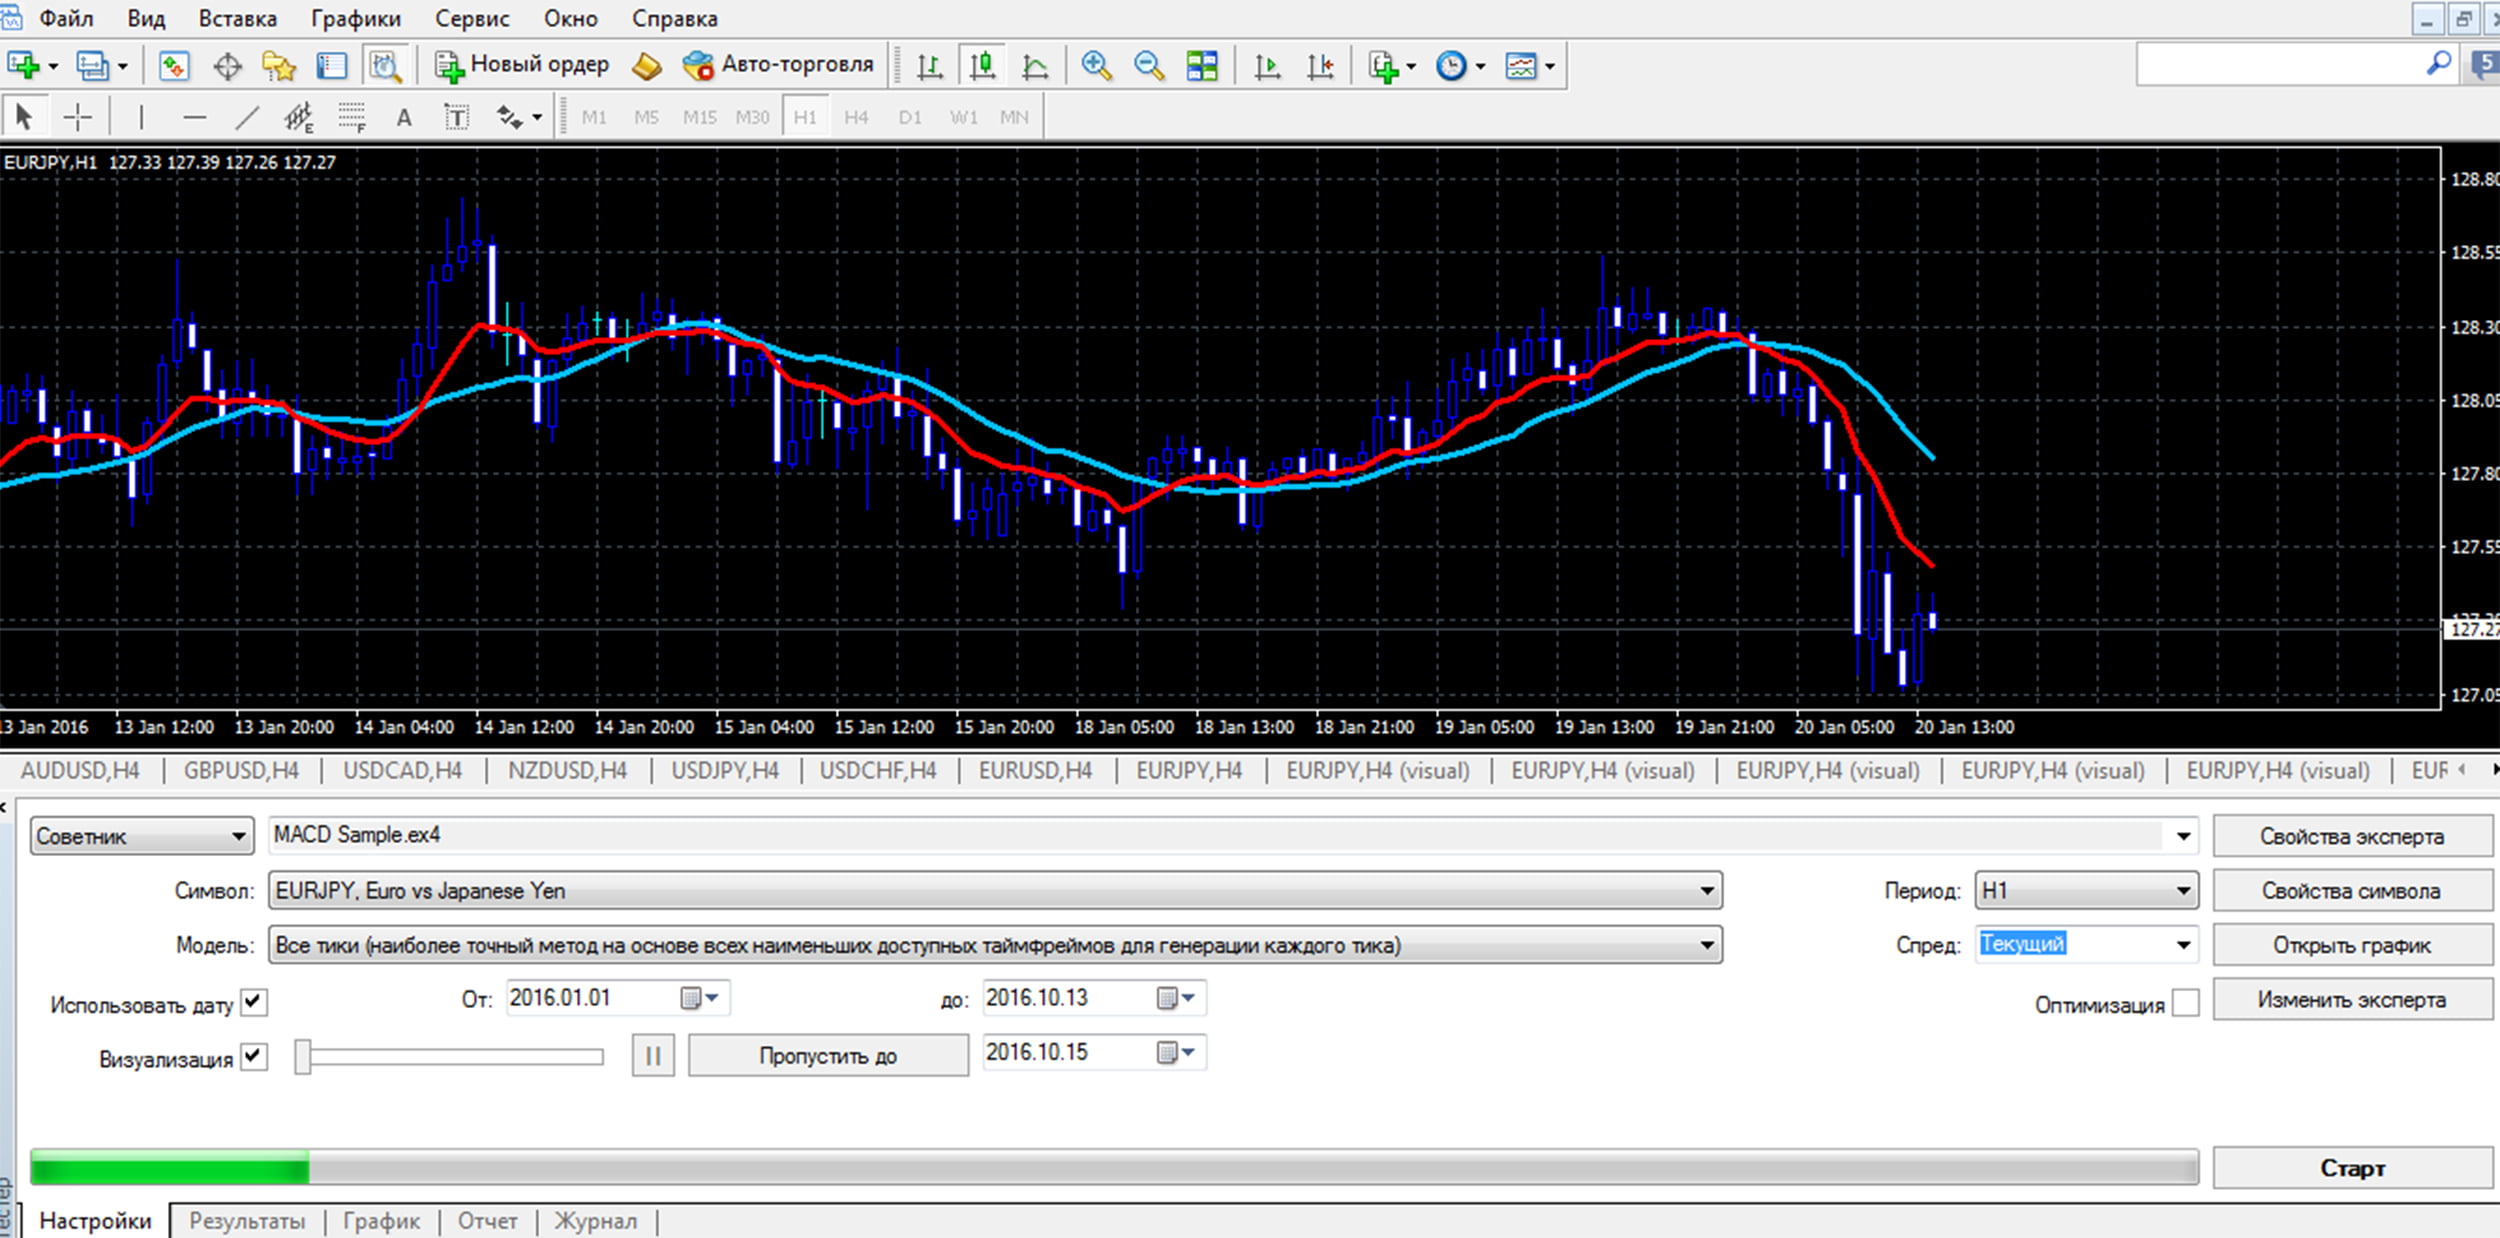 Binary options strategy tester xau/usd investing interactive chart excel